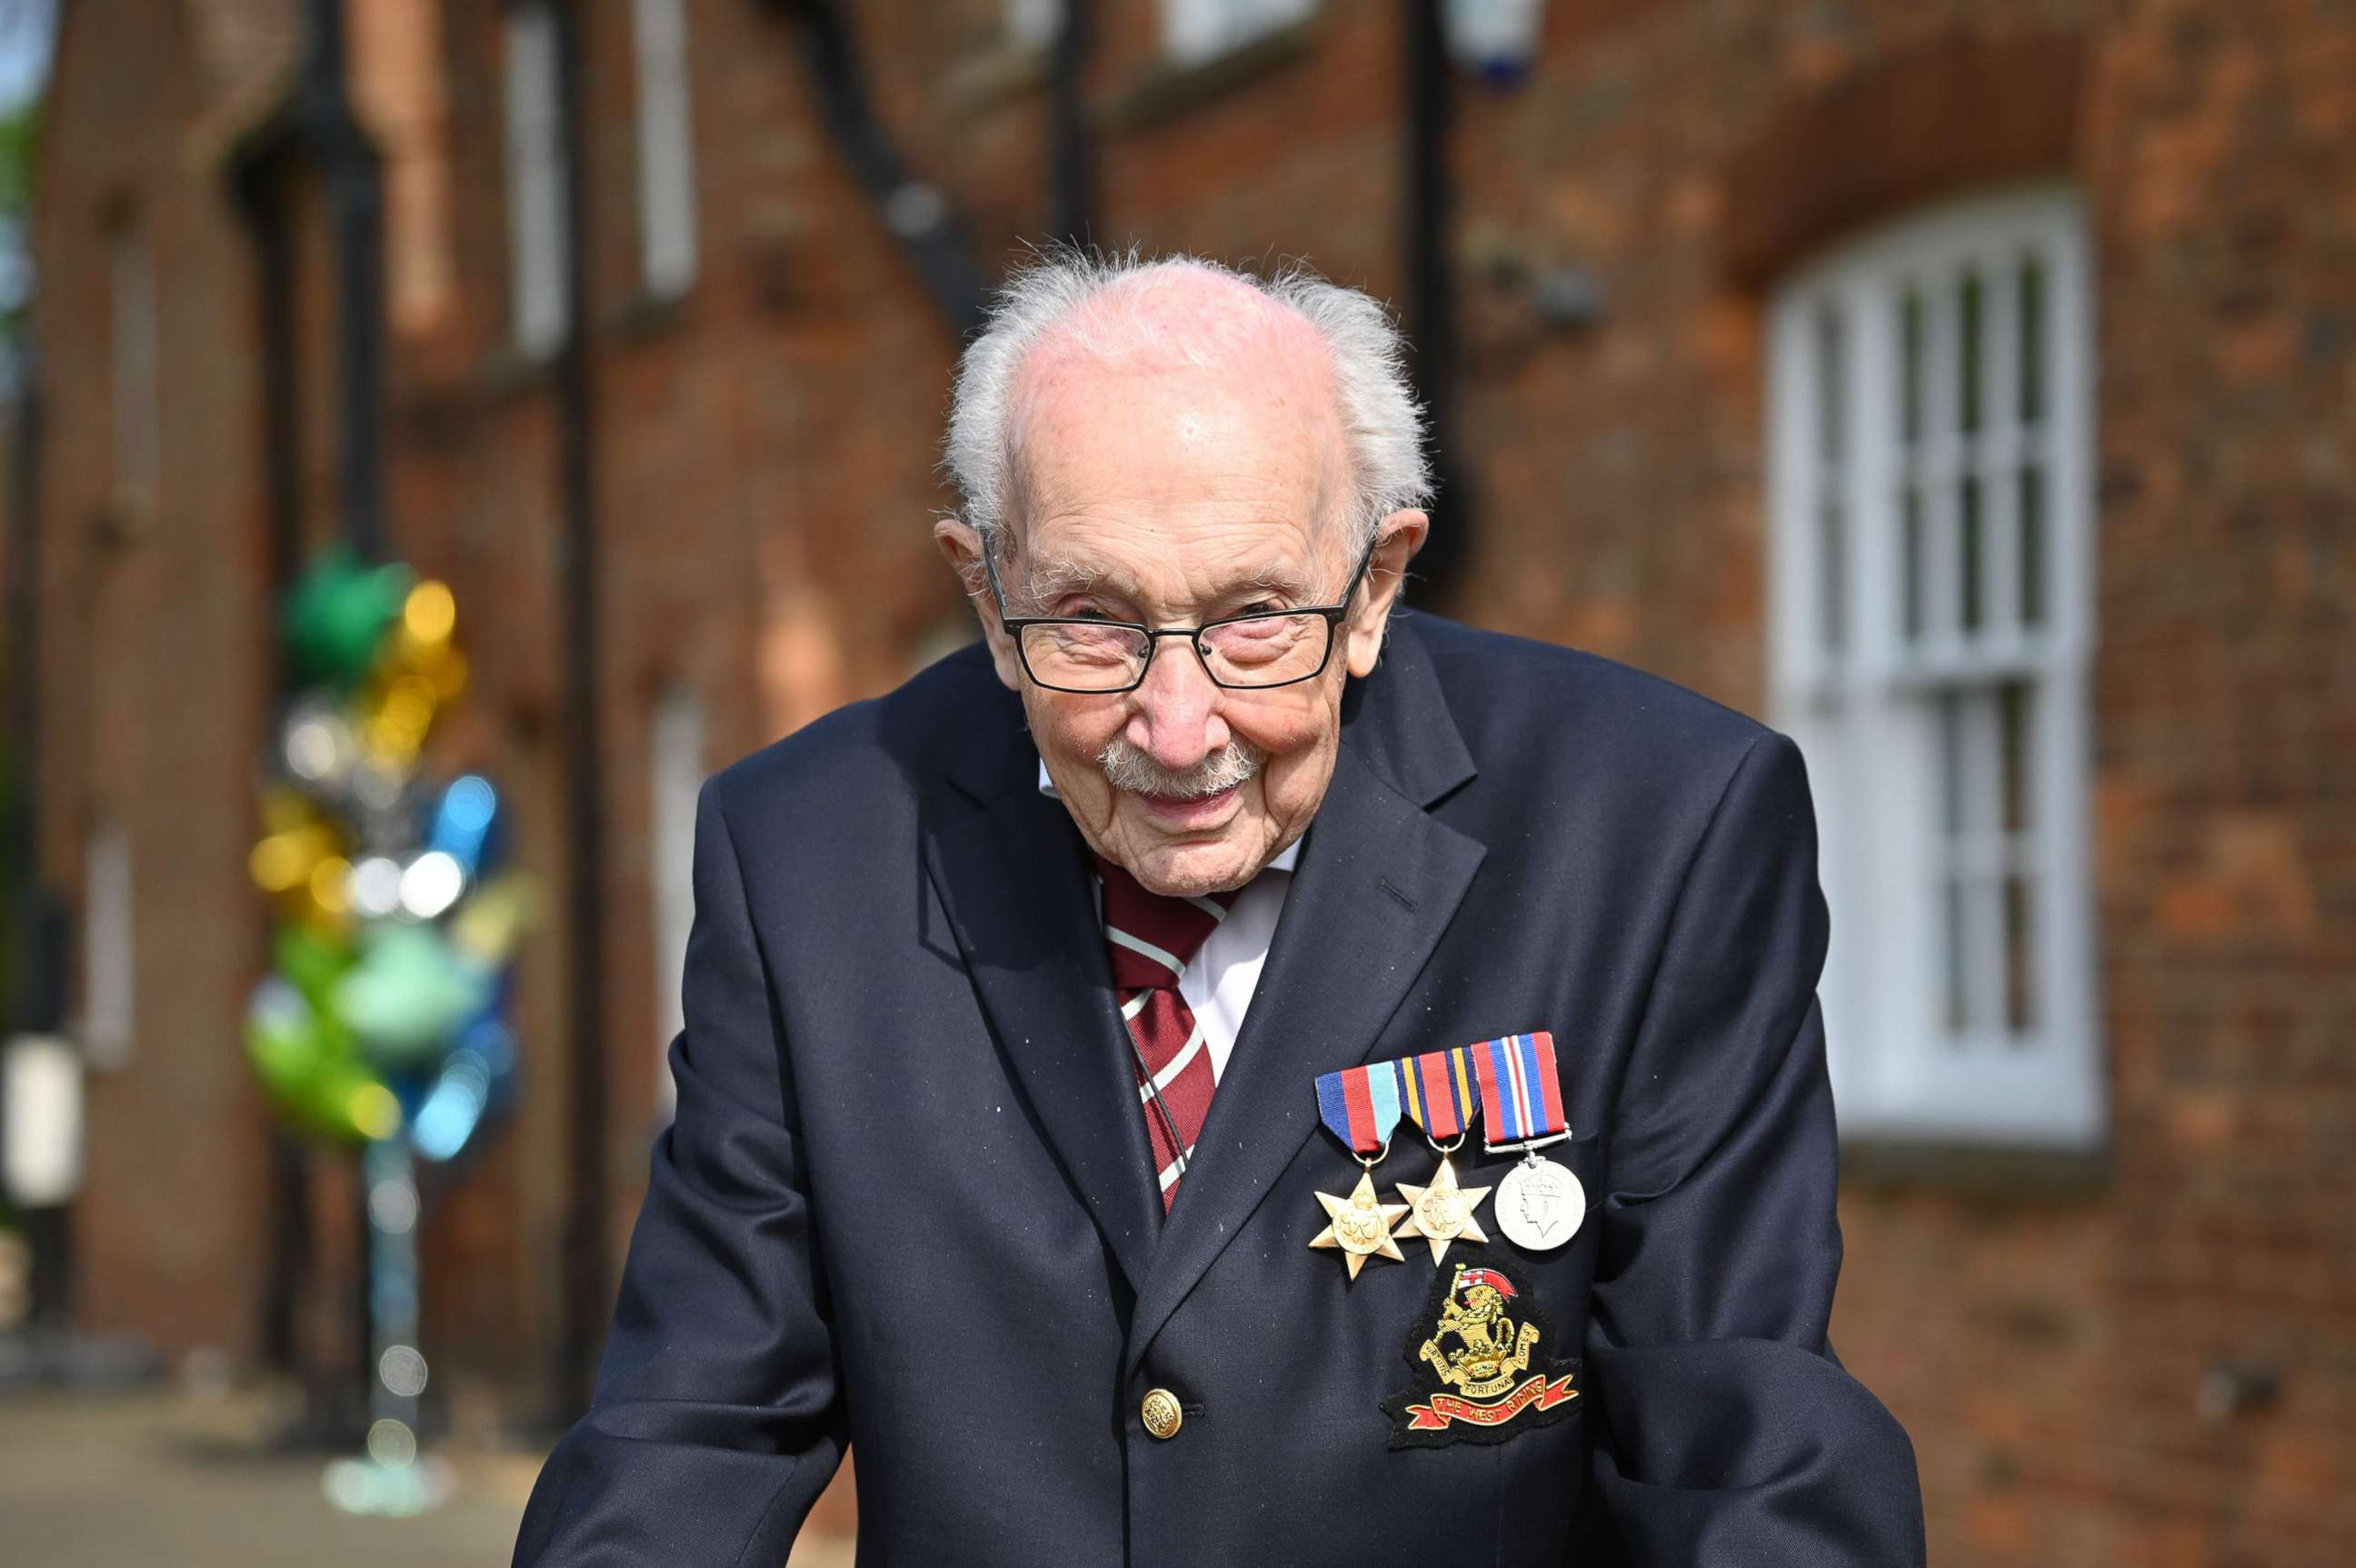 PHOTO: British World War II veteran Captain Tom Moore poses doing a lap of his garden in the village of Marston Moretaine, 50 miles north of London, April 16, 2020.